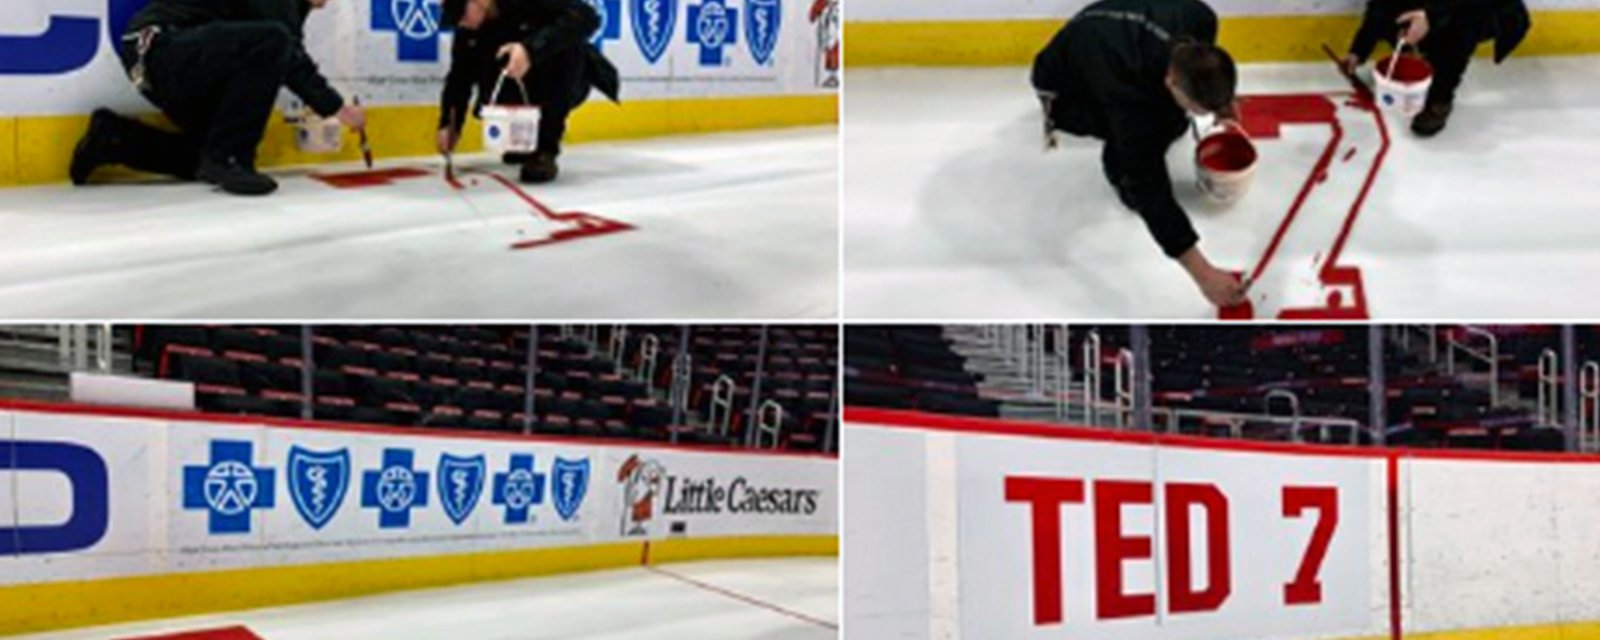 Every NHL team will pay tribute to Ted Lindsay this weekend